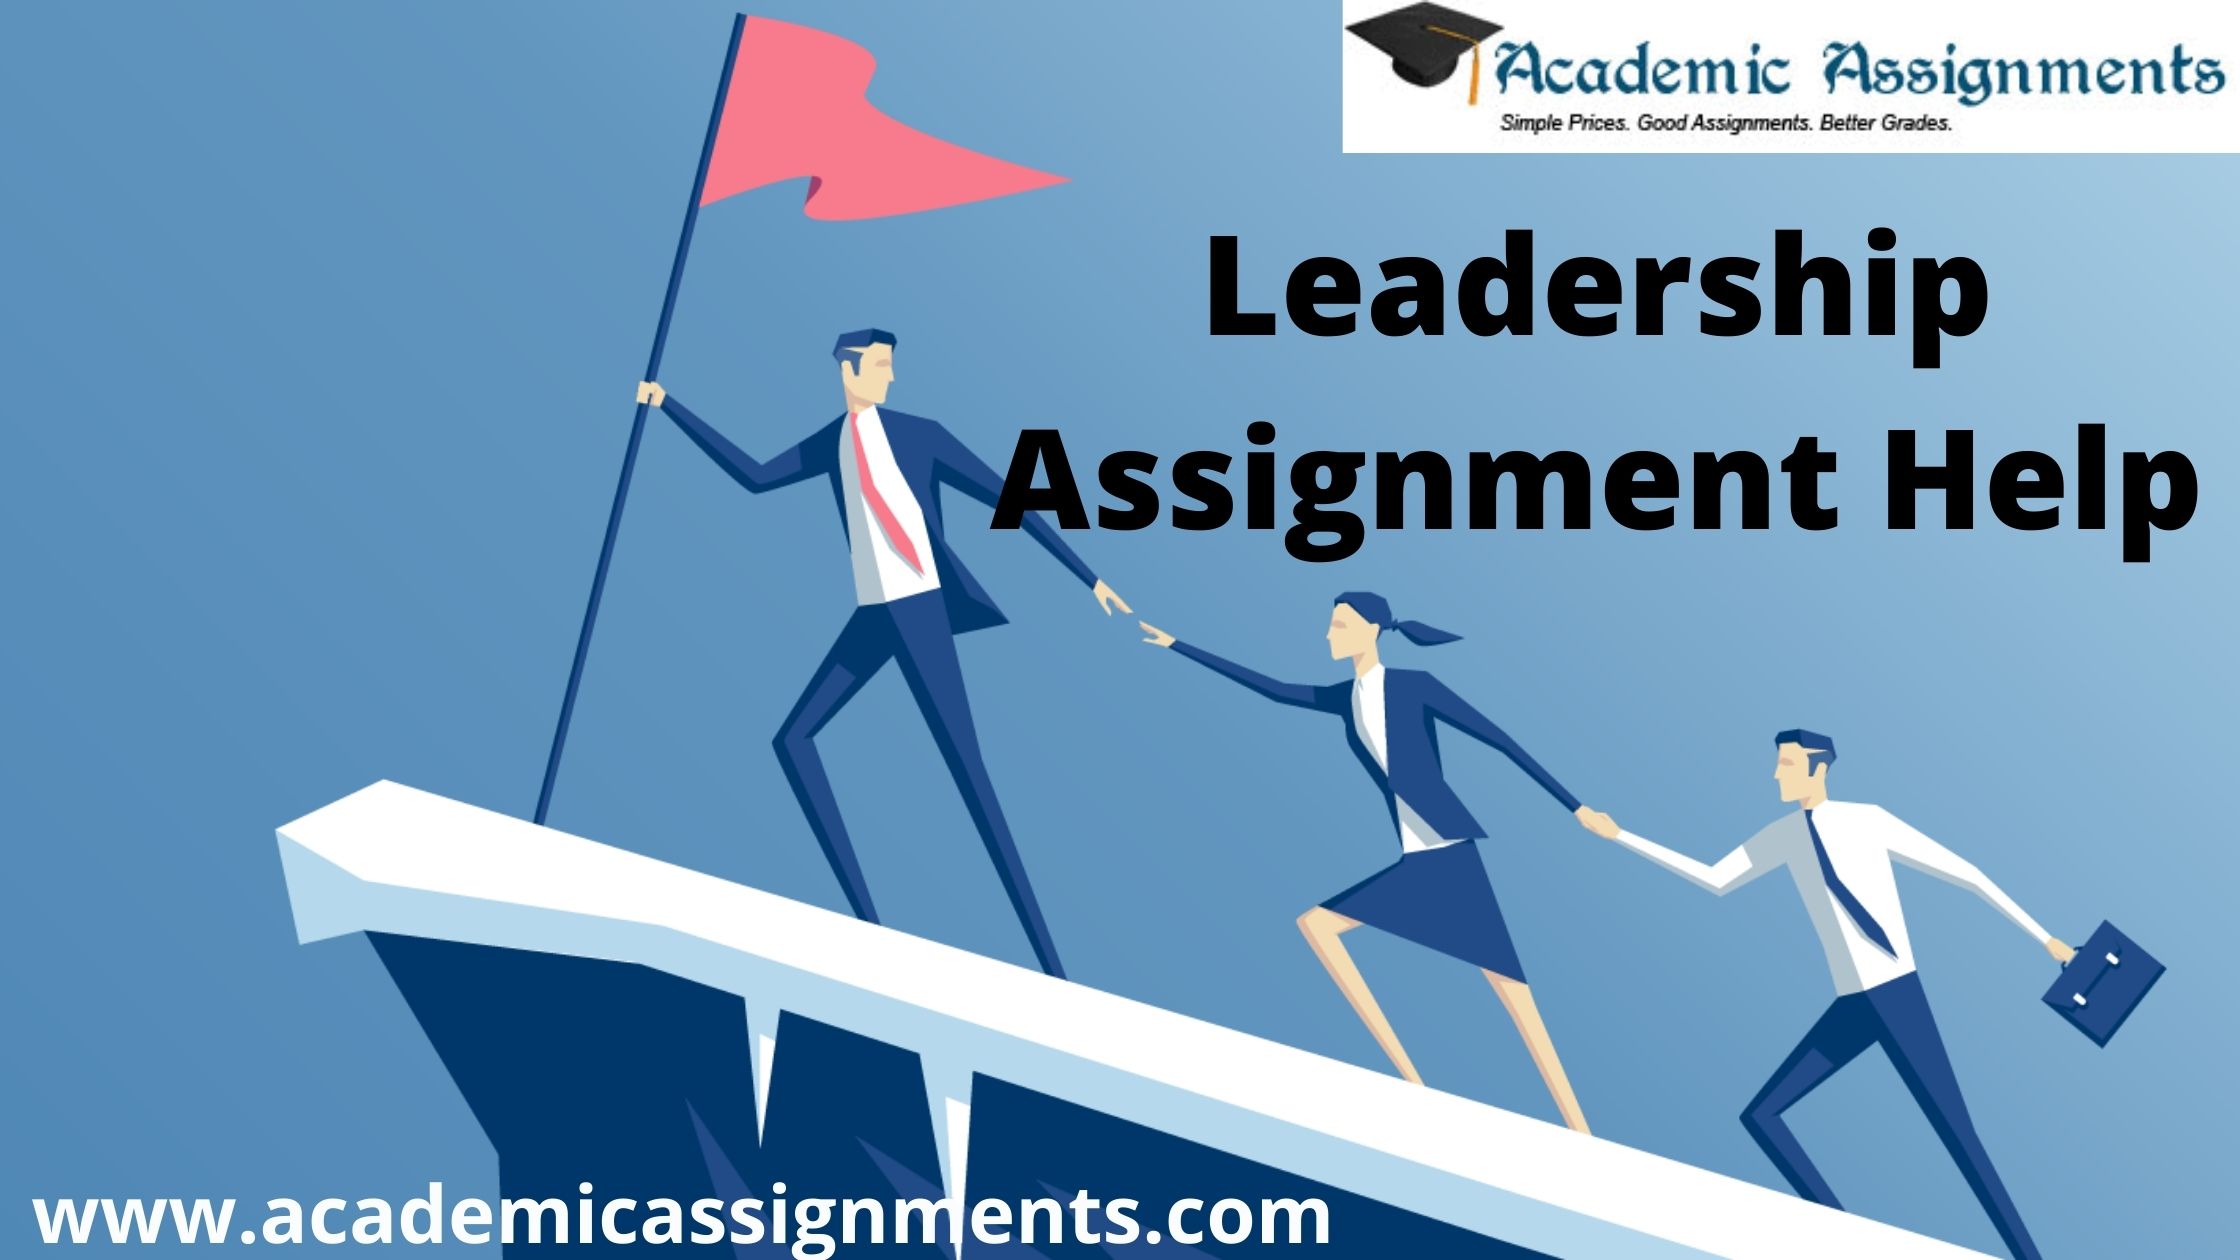 Leadership Assignment Help